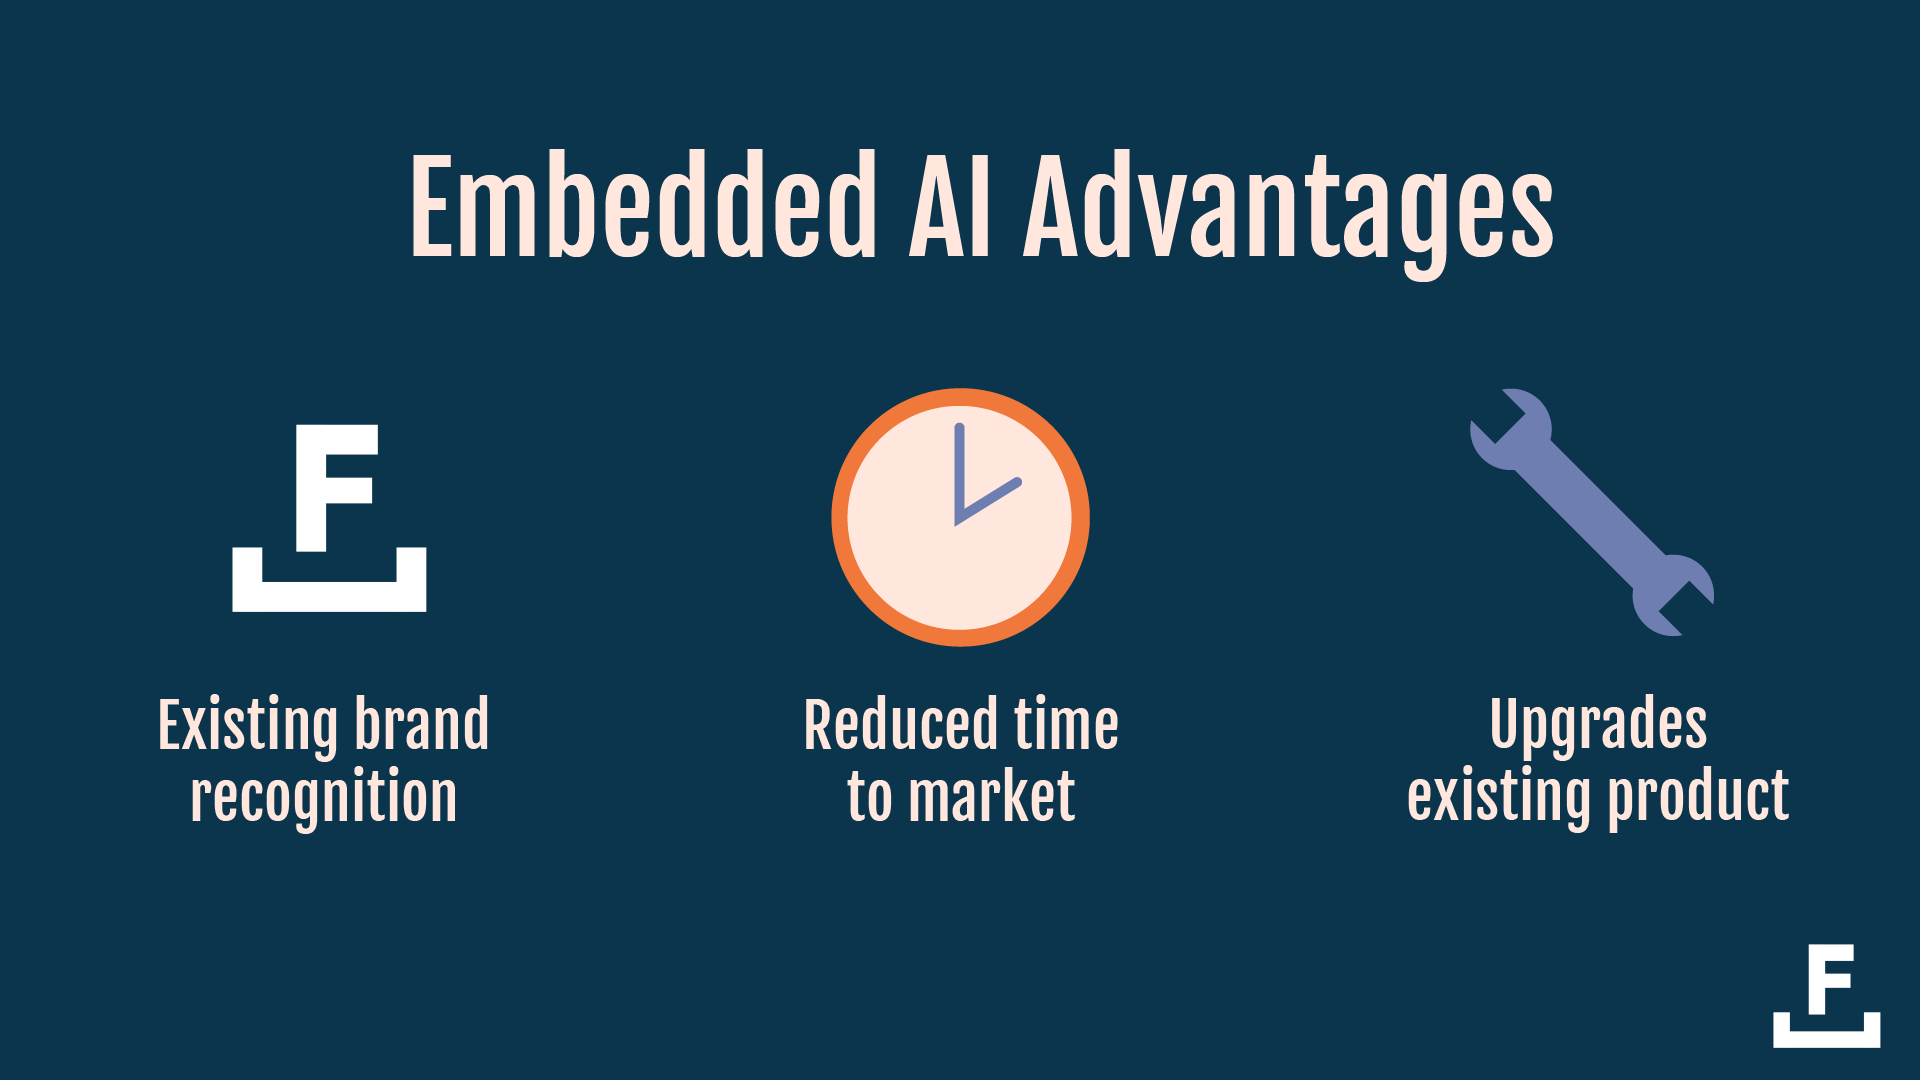 A list of advantages of embedded AI opportunities